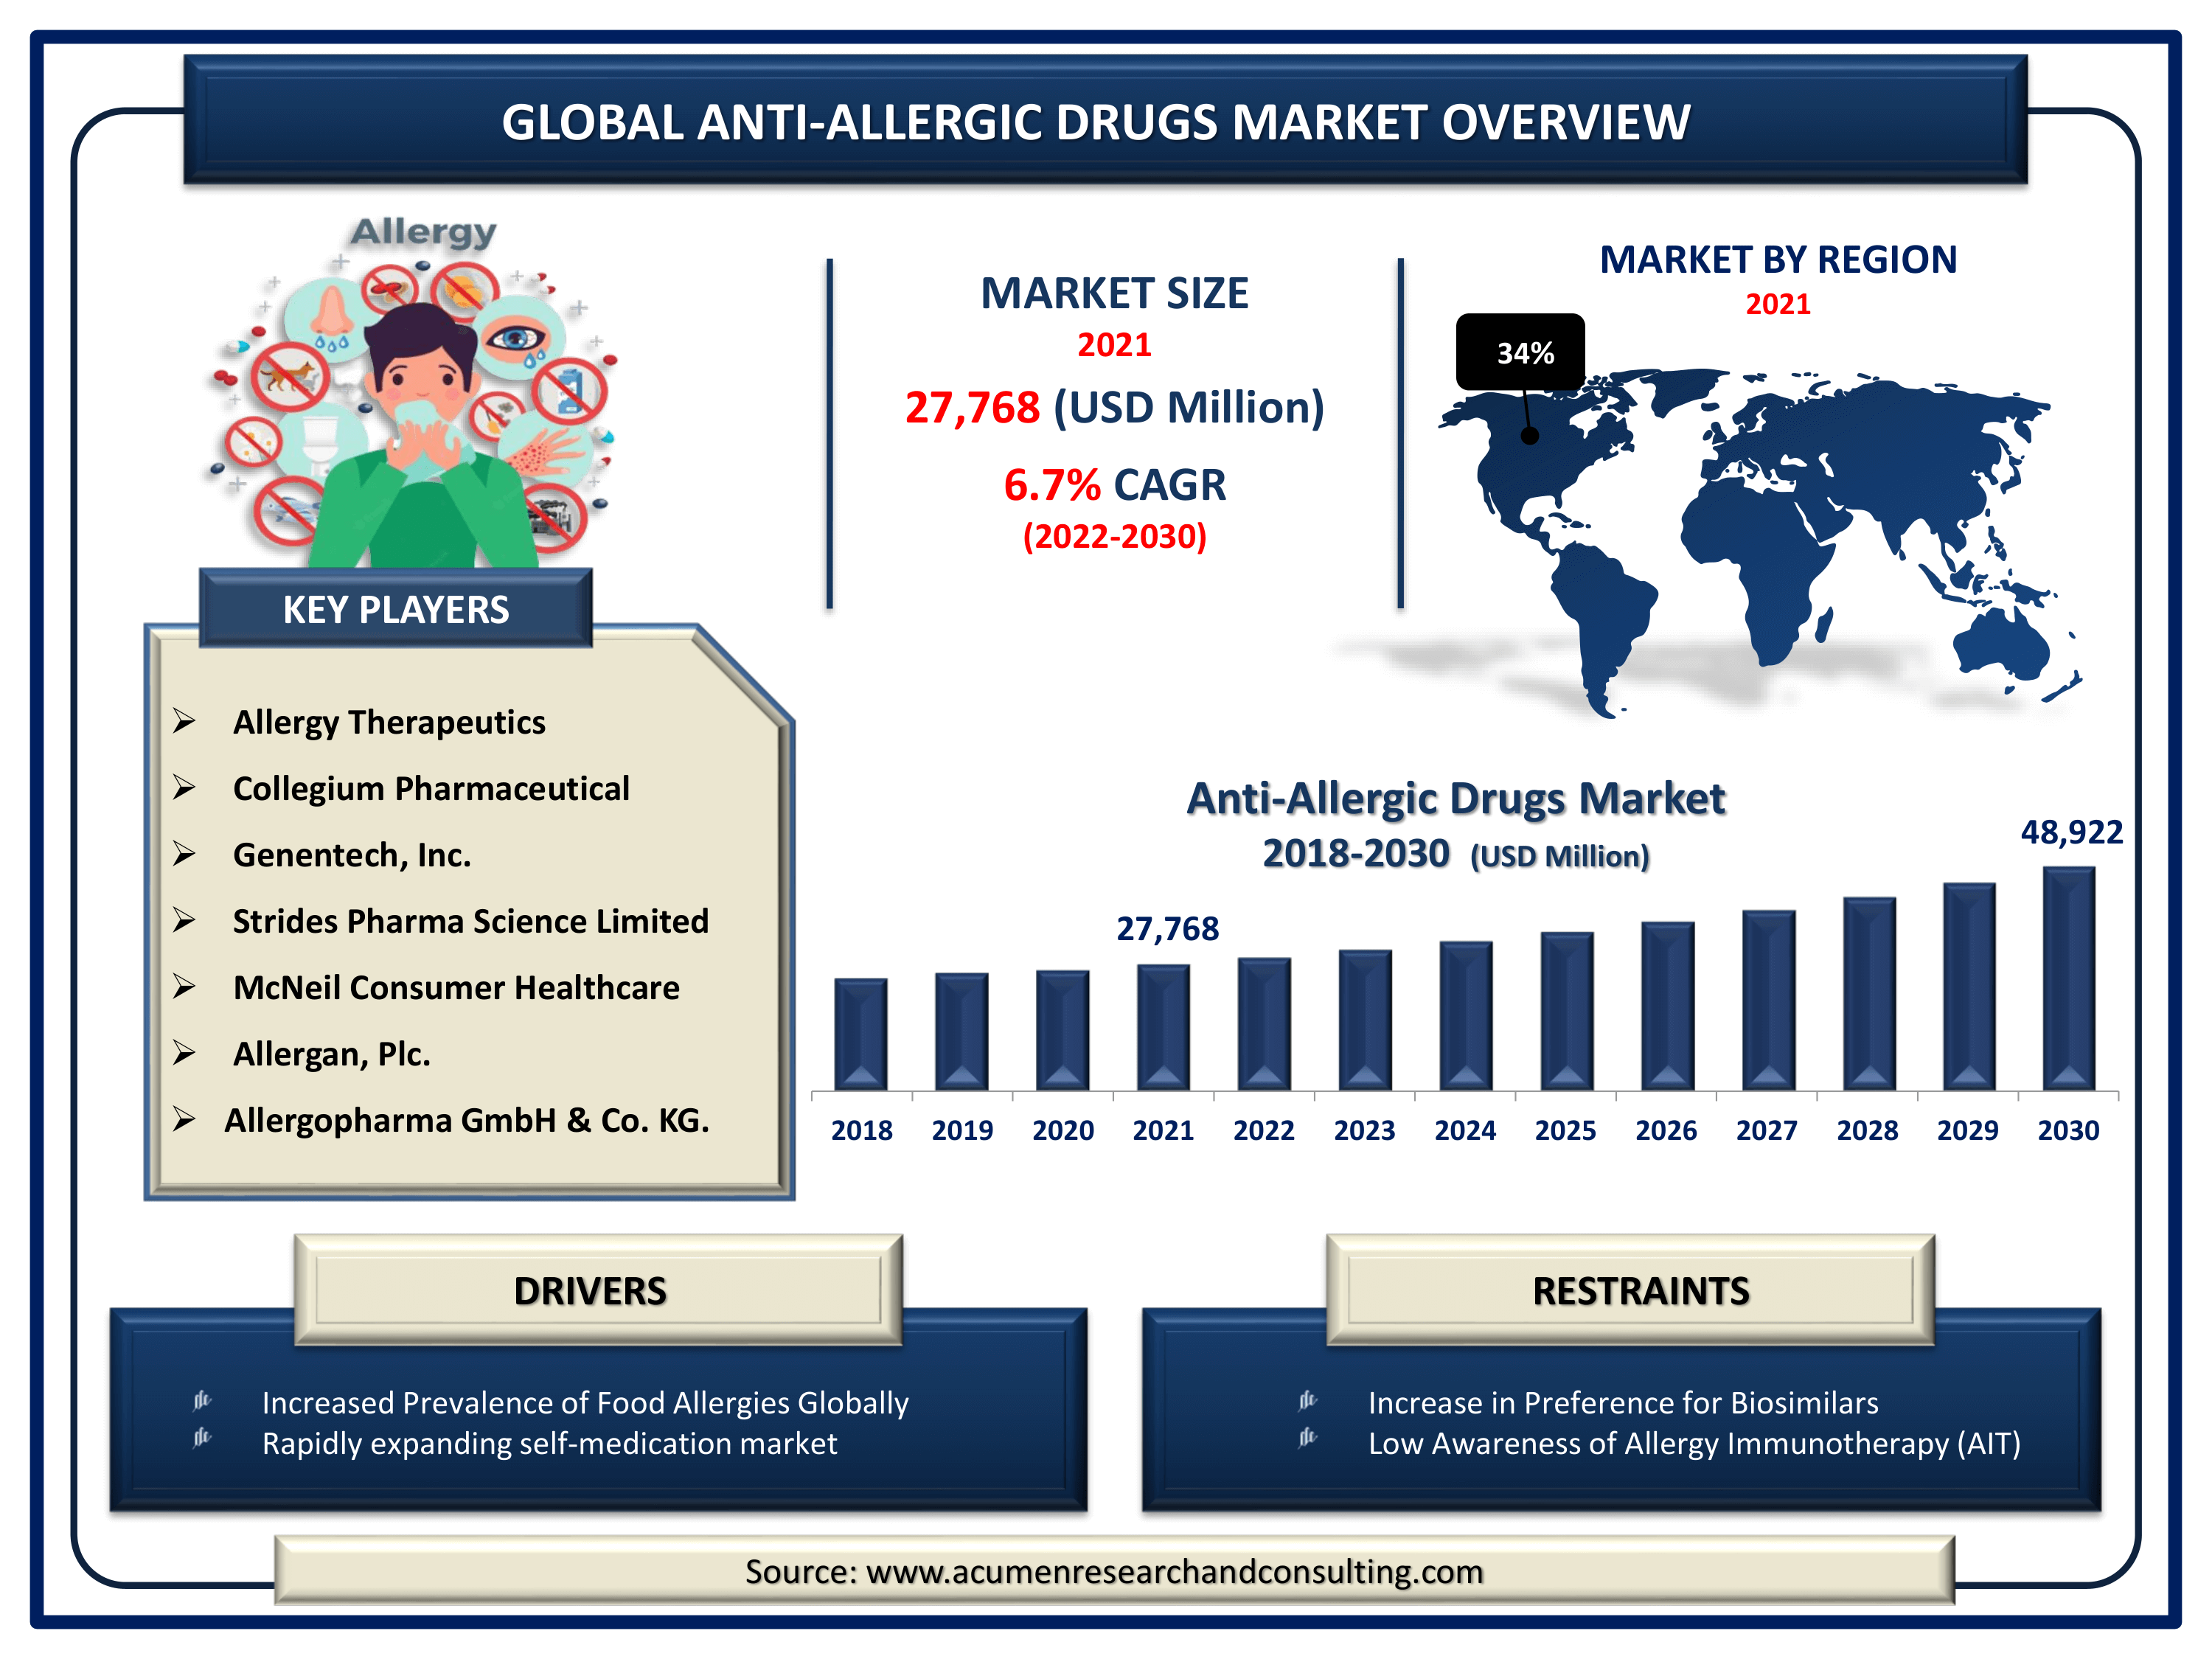 Global anti-allergic drugs market revenue is expected to increase by USD 48,922 million by 2030, with a 6.7% CAGR from 2022 to 2030.